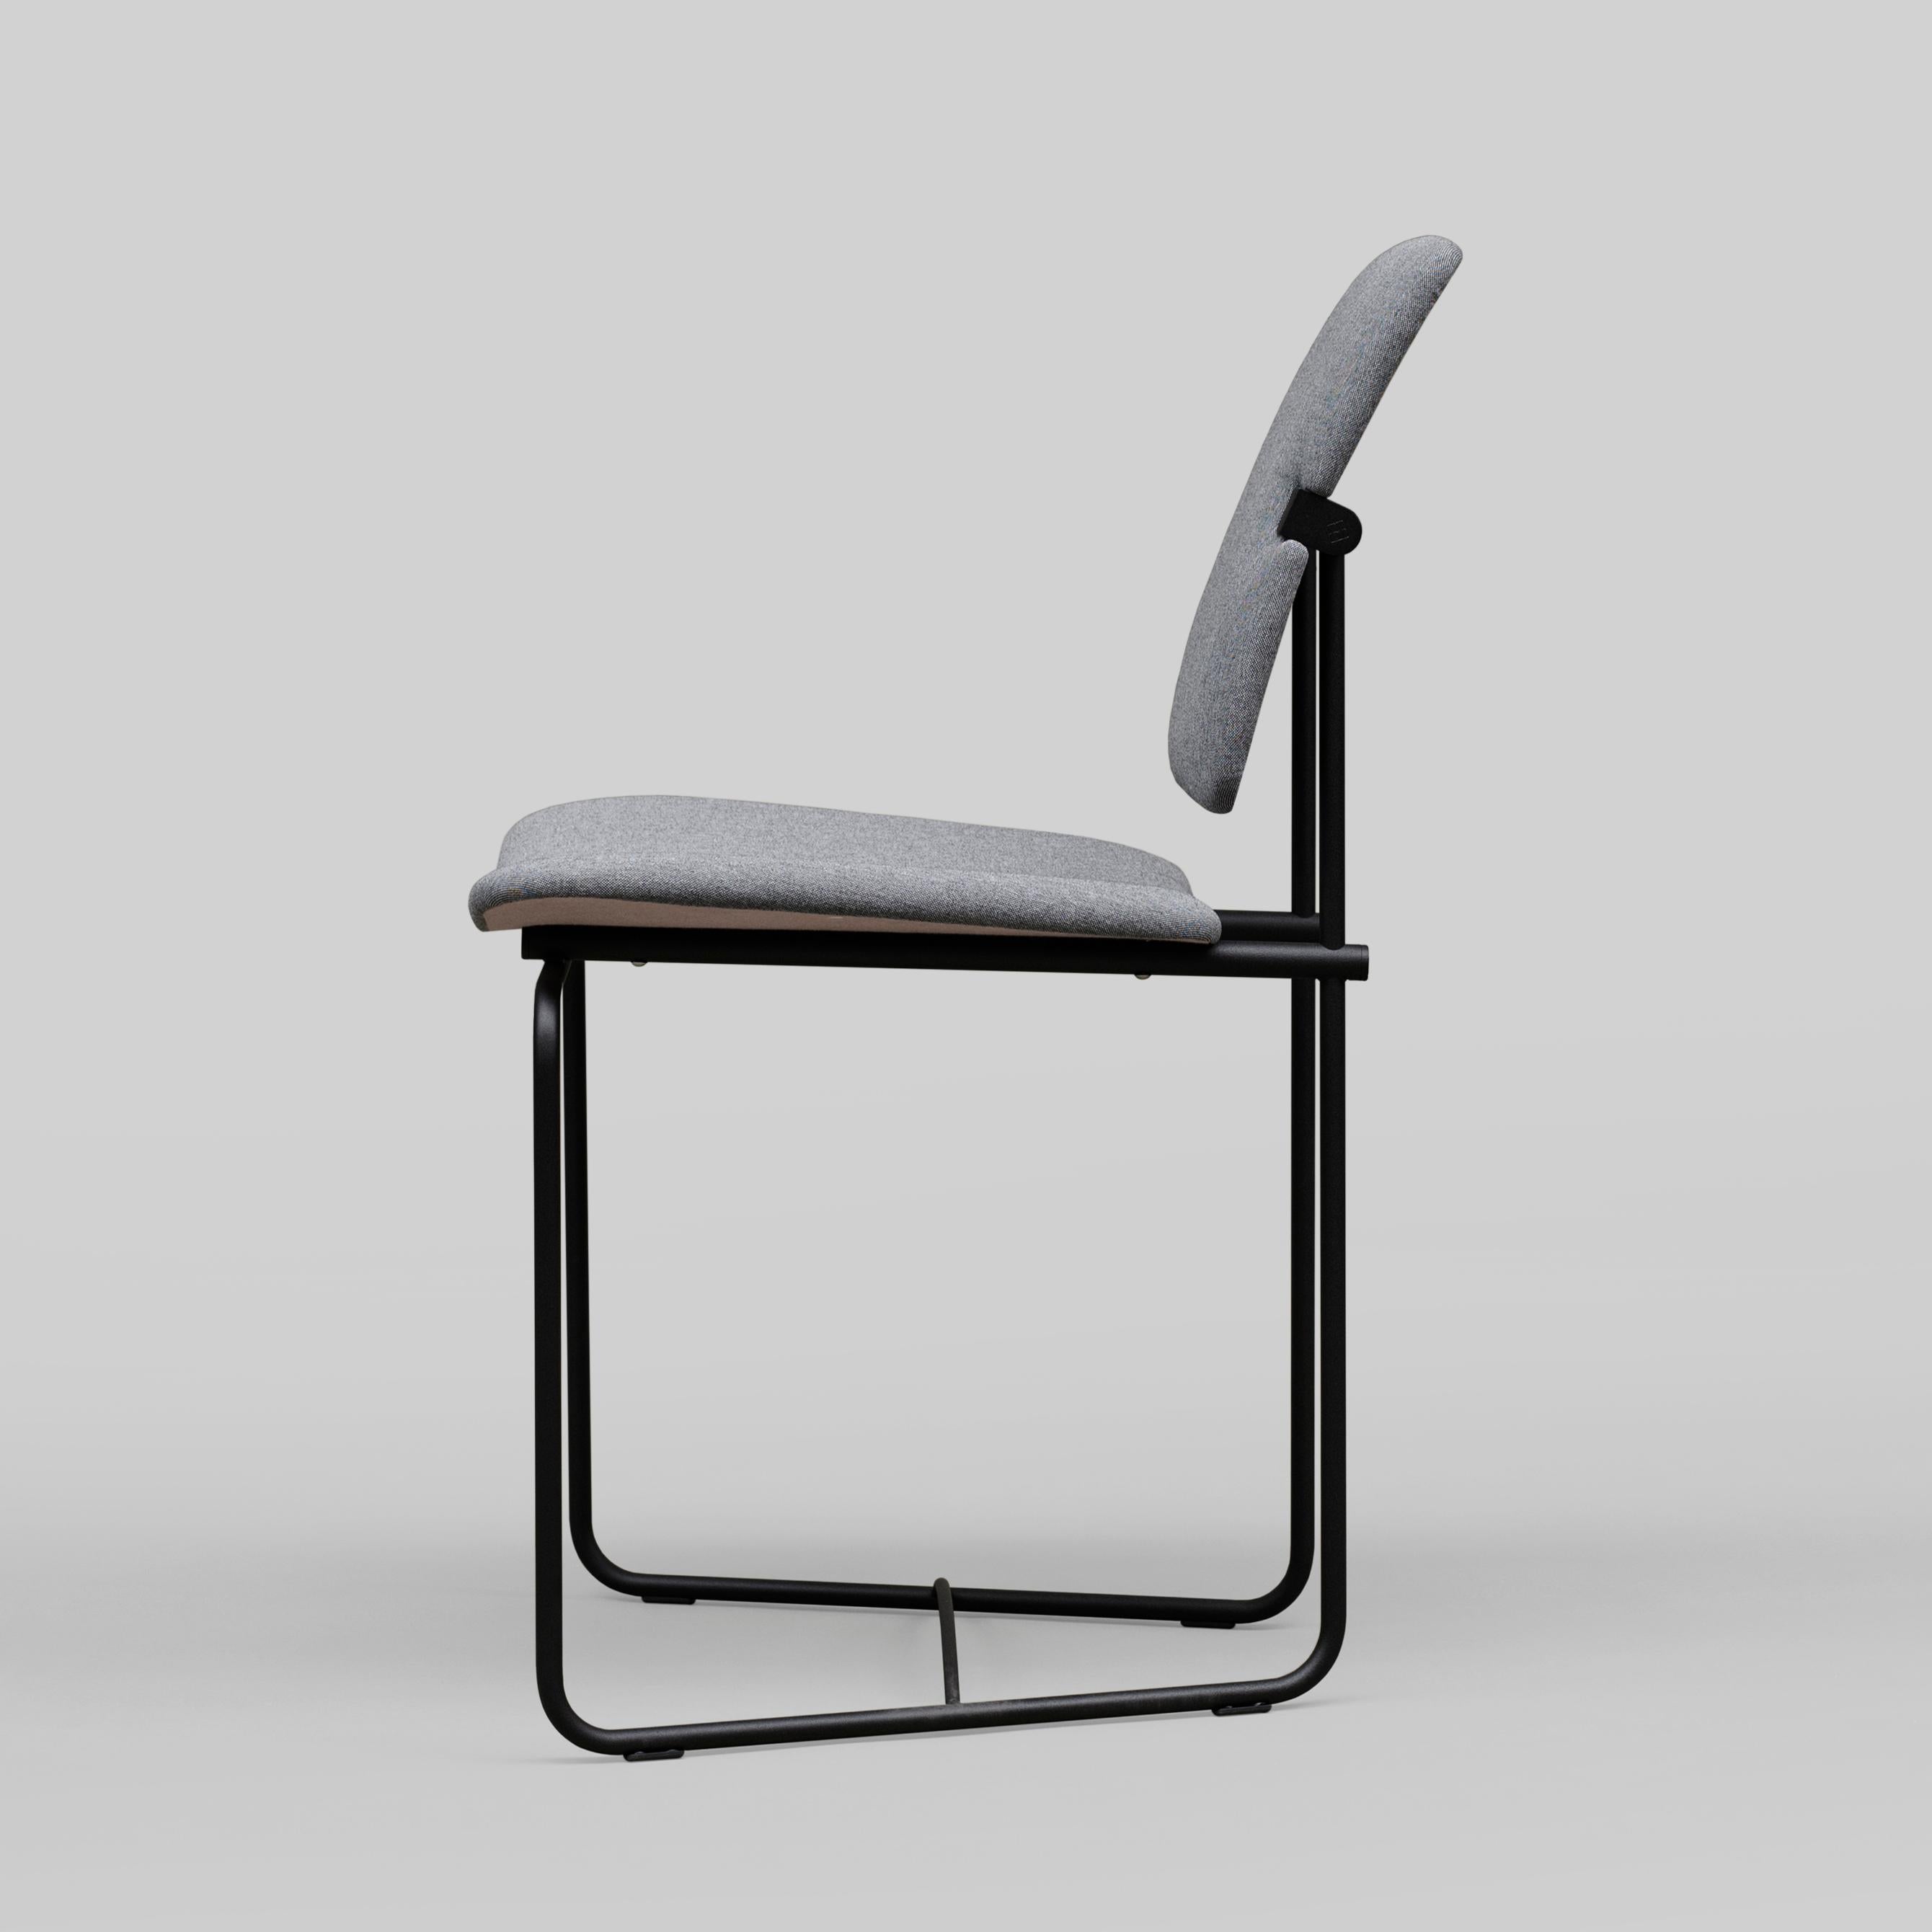 Chair designed by Peter Ghyczy in 1986.
Manufactured by Ghyczy (Netherlands)

Avant Garde in its look and function, this lightweight design features a flexible backrest, which adjusts to the movement of the person using it.

Material and